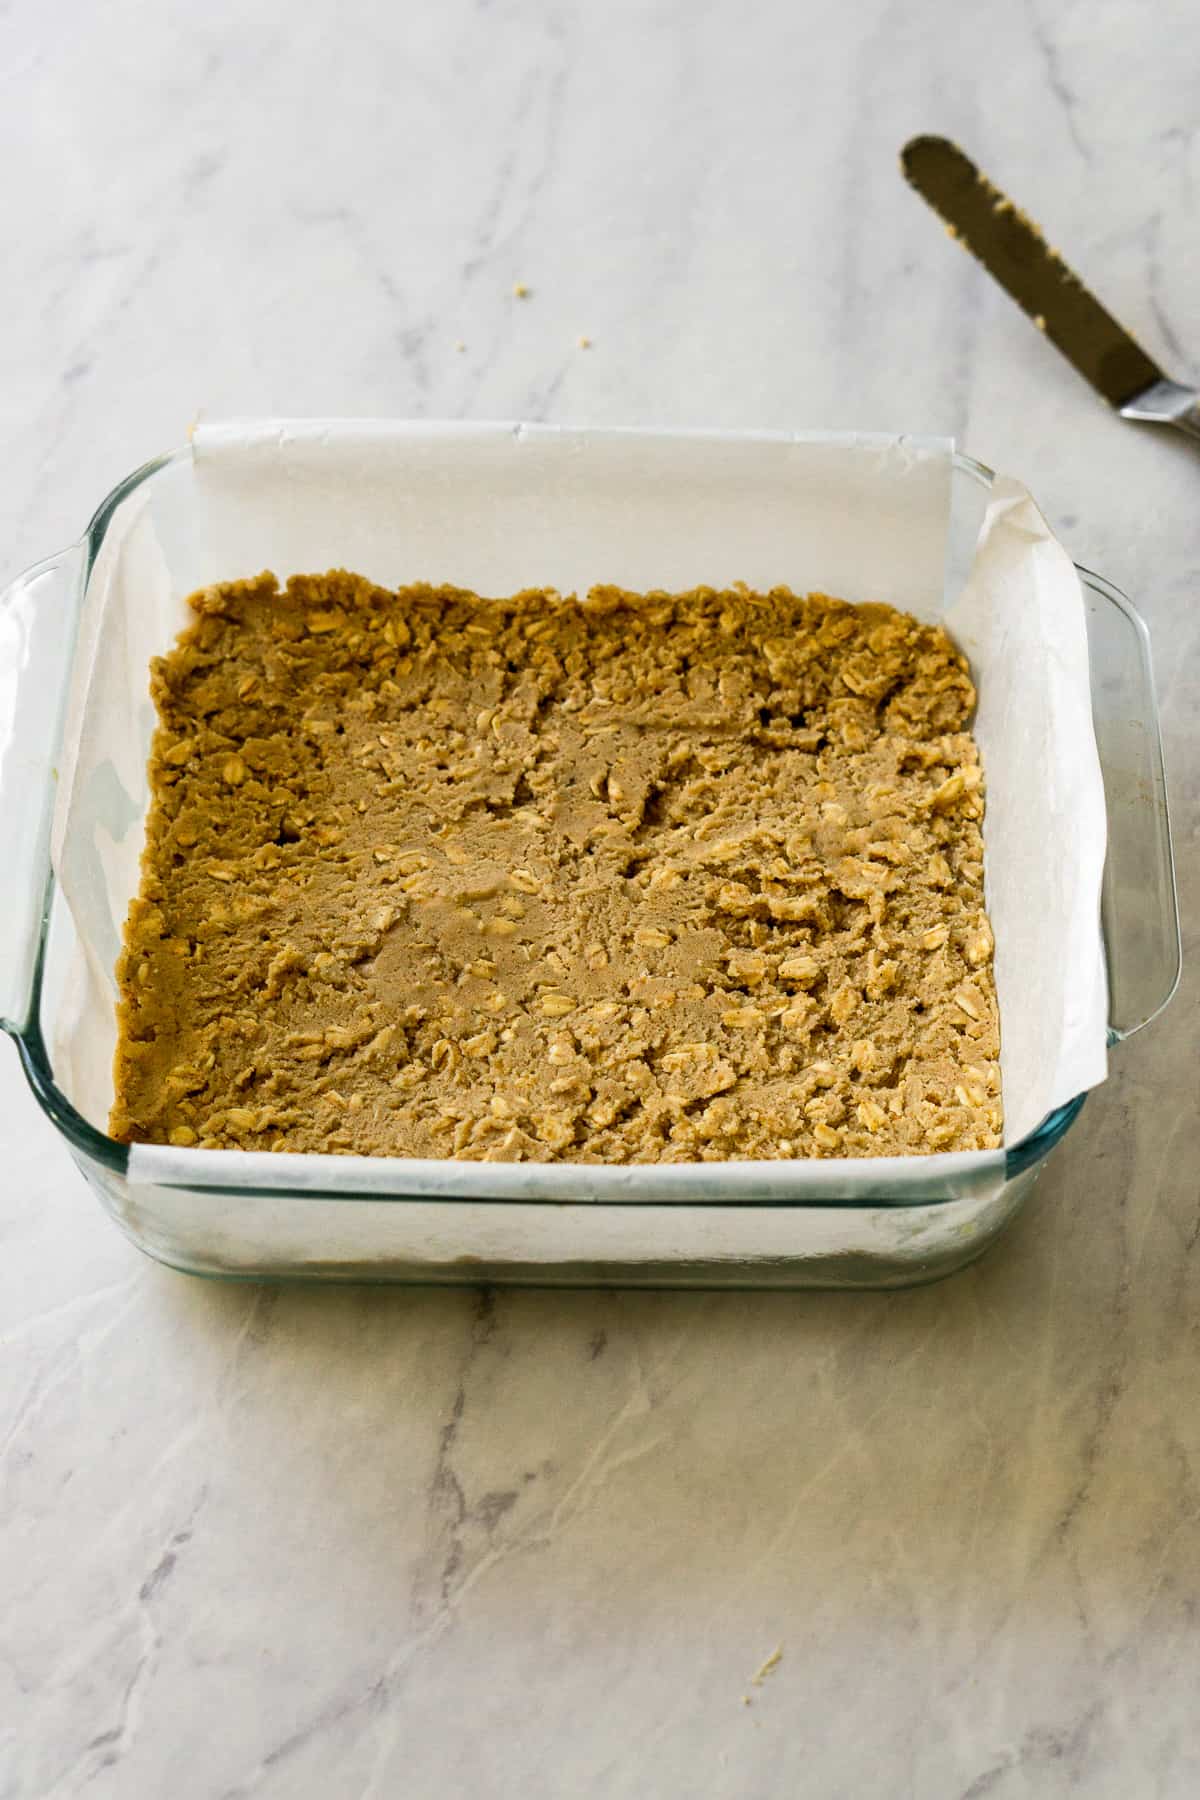 Cookie base dough pressed down in an 8x8 inch square glass pan lined with parchment paper.